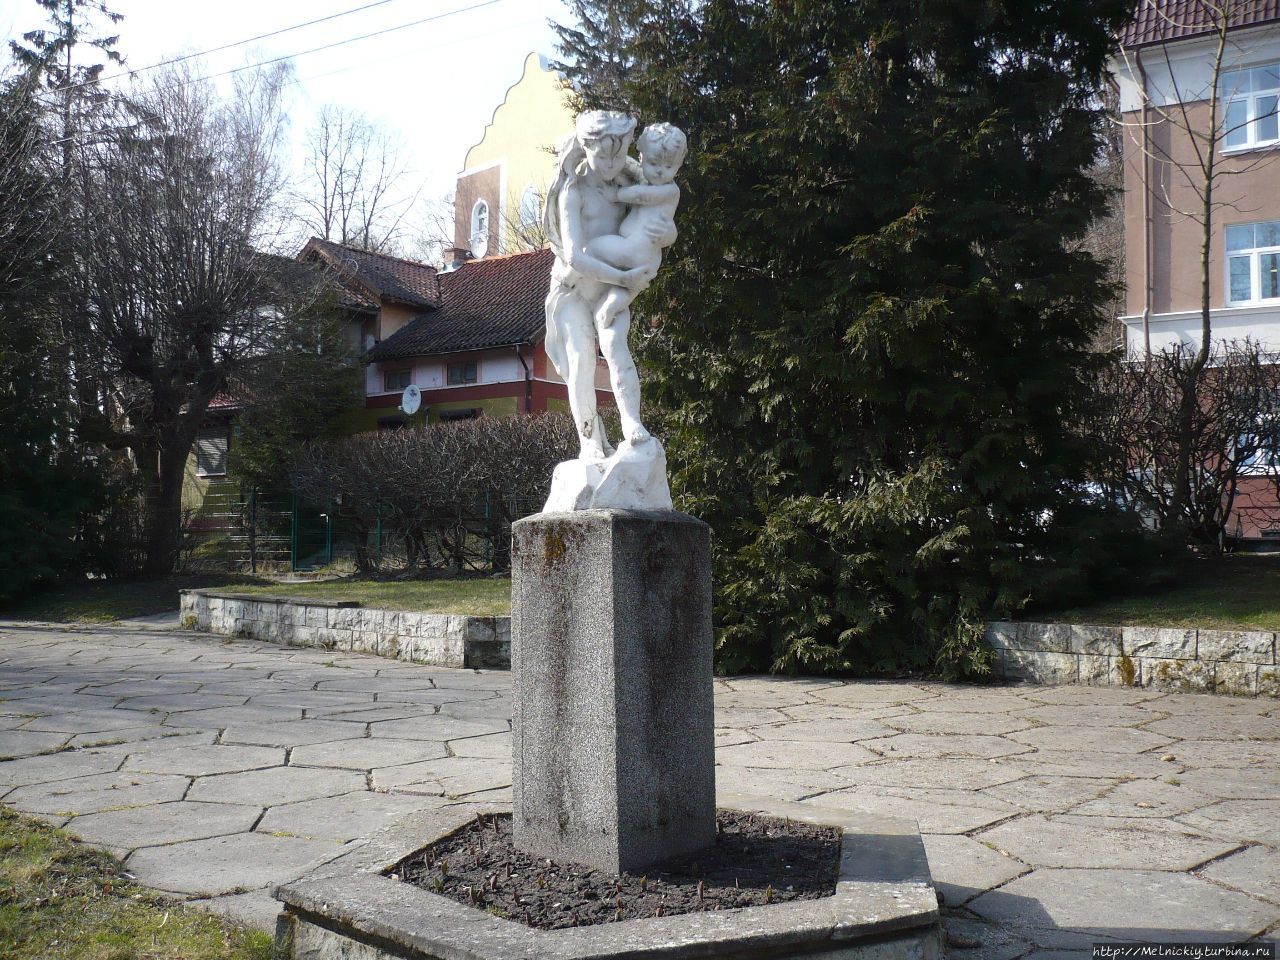 Скульптура девочки с ребенком / Sculpture of a girl with a child